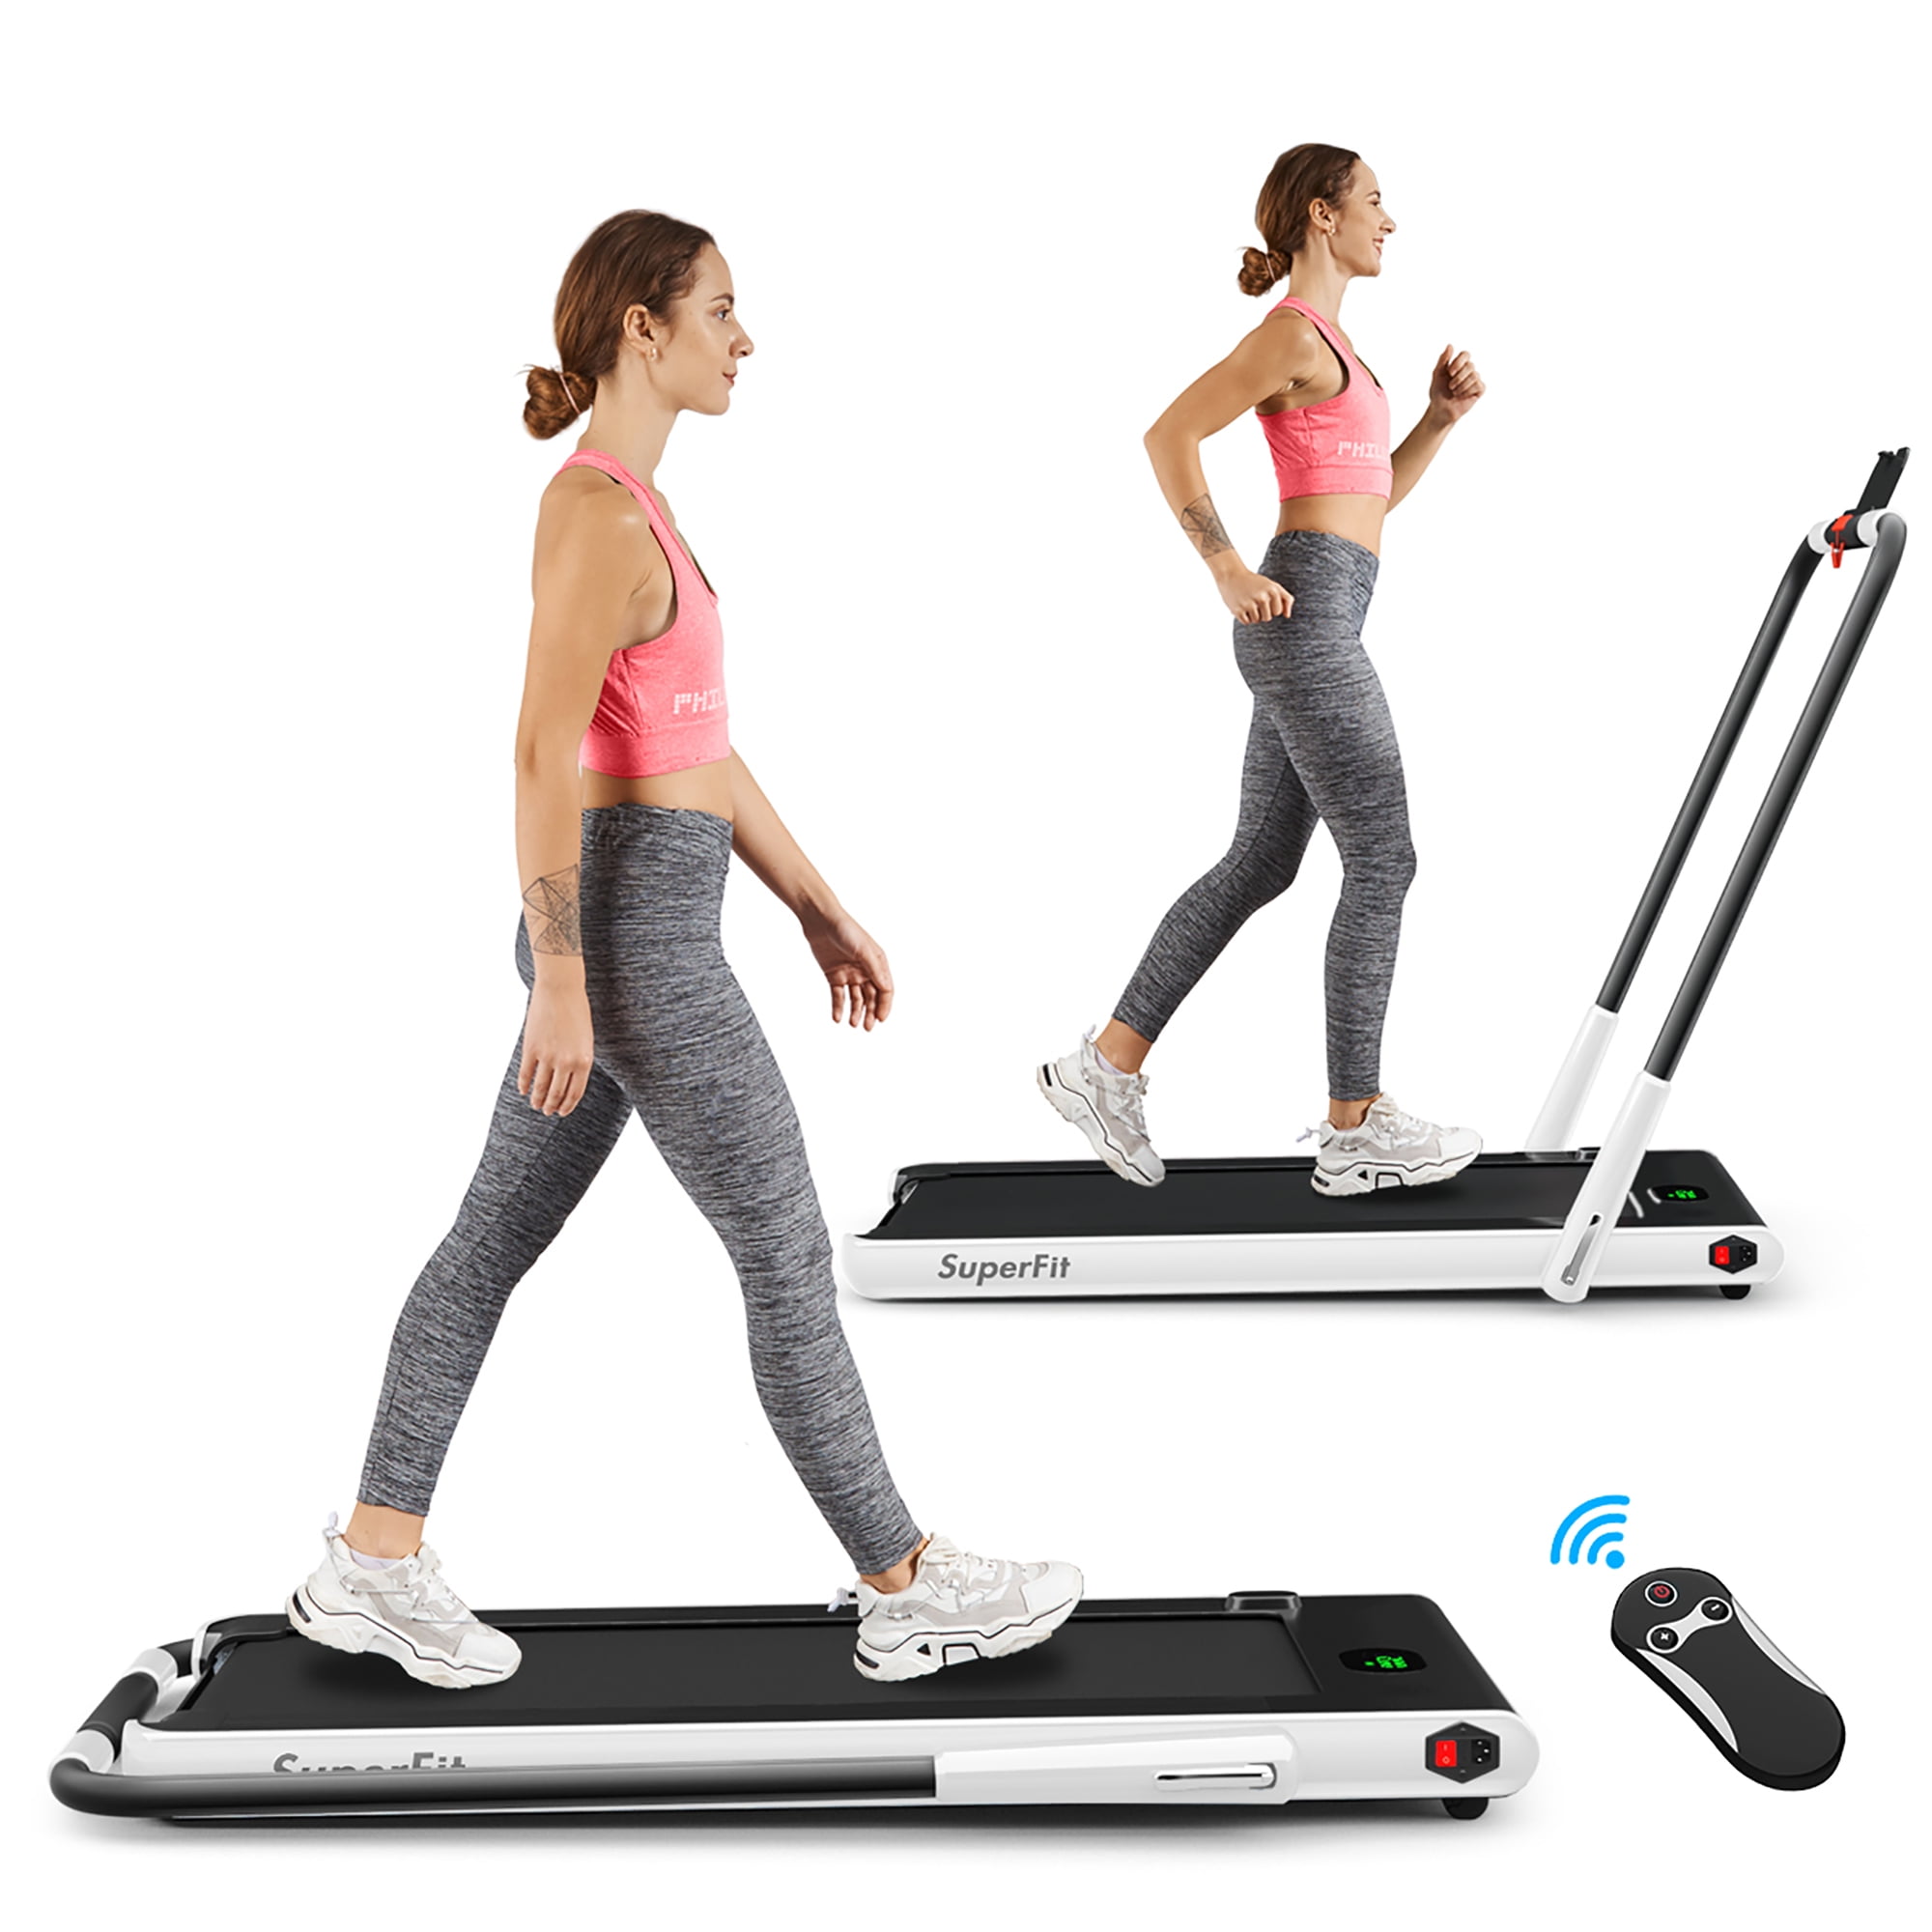 Installation-Free Foldable Treadmill Compact Electric Running Machine 2 in 1 Under Desk Treadmill with LED Display Walking Running Jogging for Home Office Use 2.5 HP Folding Treadmill for Home 